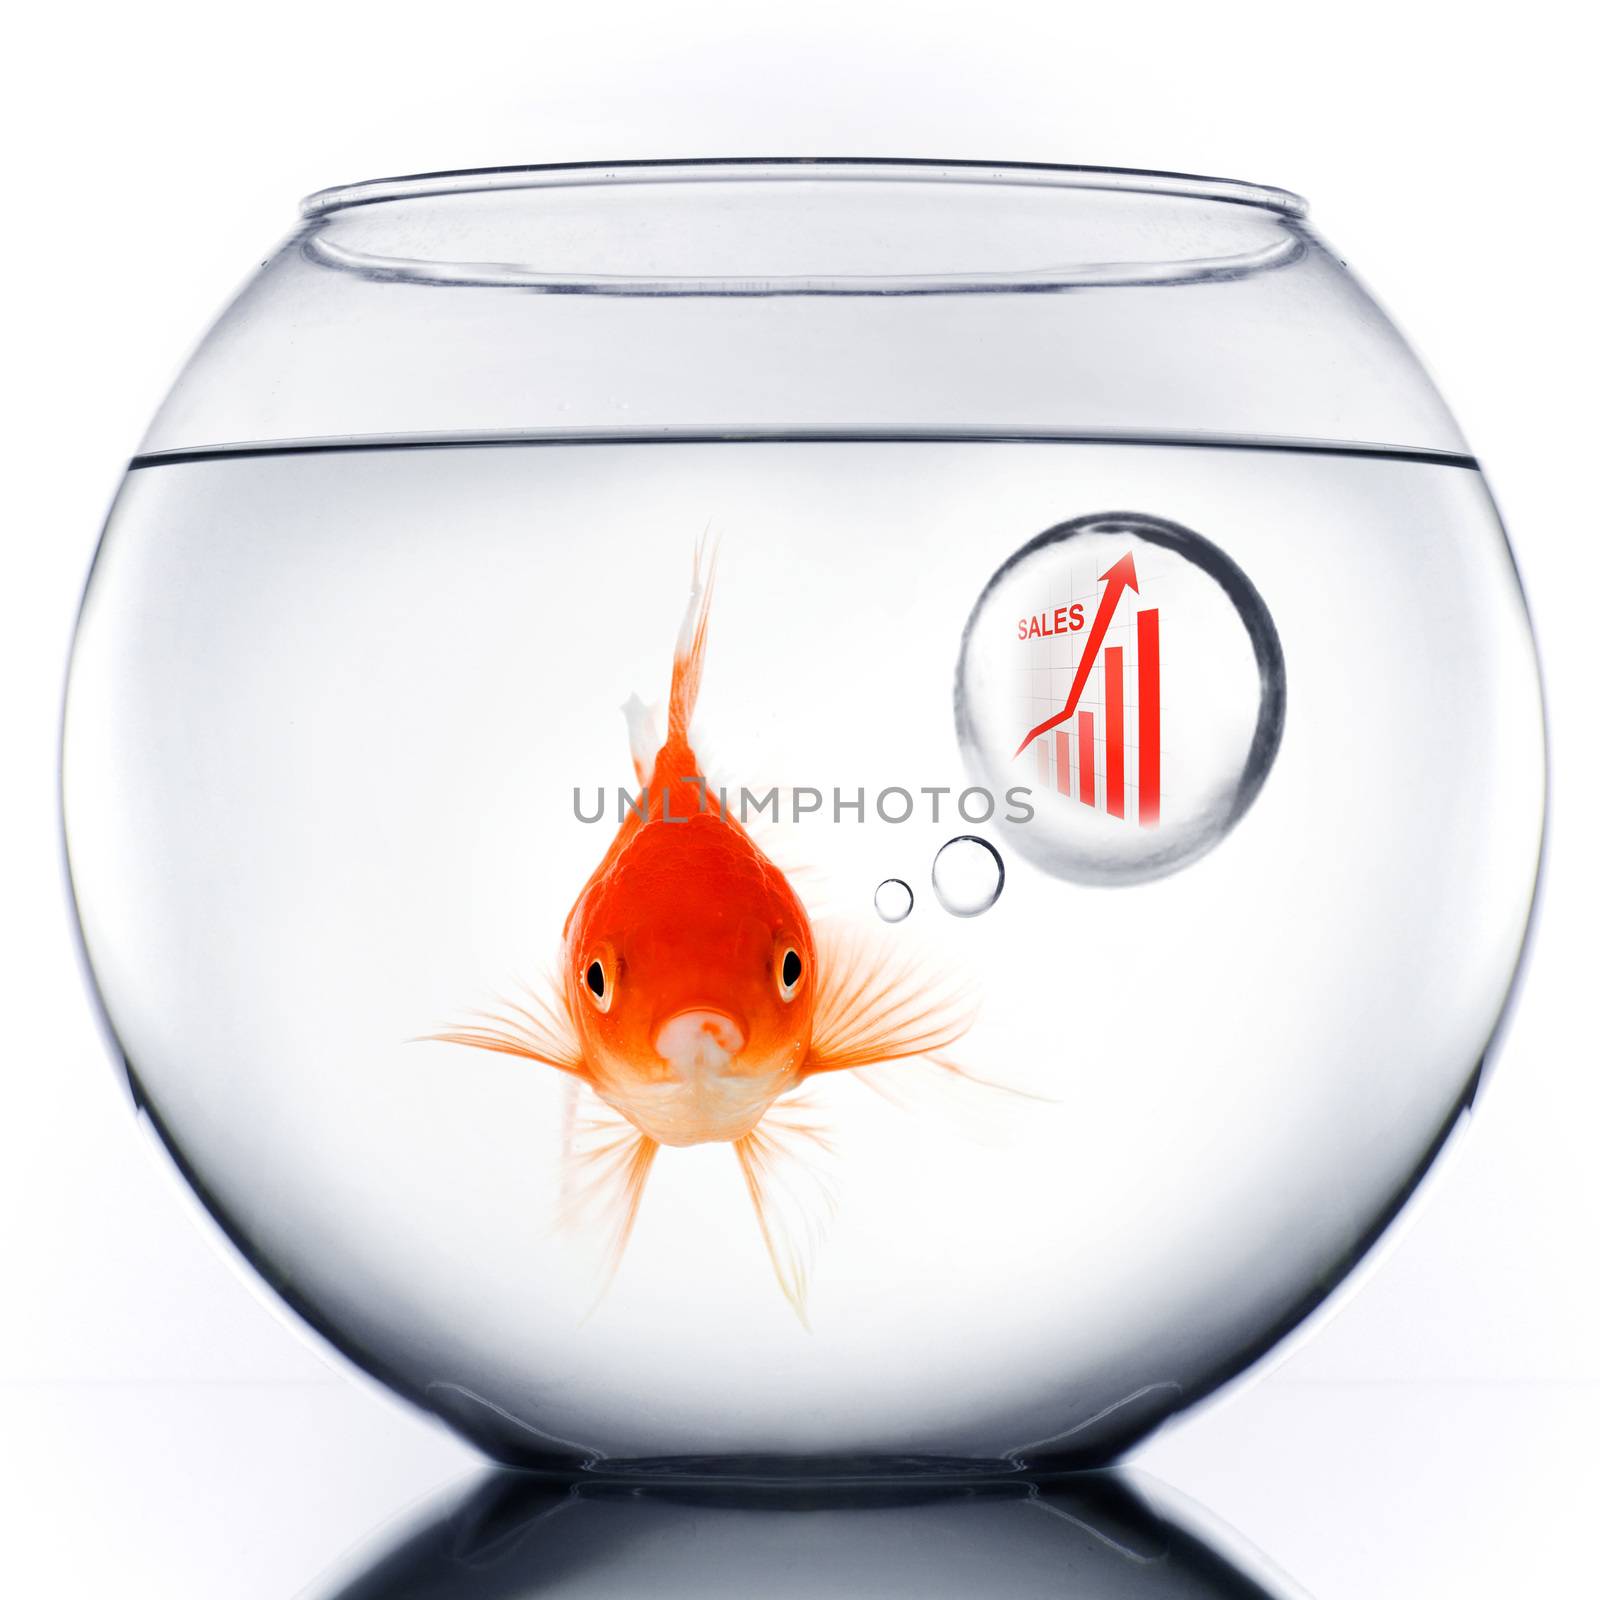 Smart Gold fish in bowl thinking about sales growth